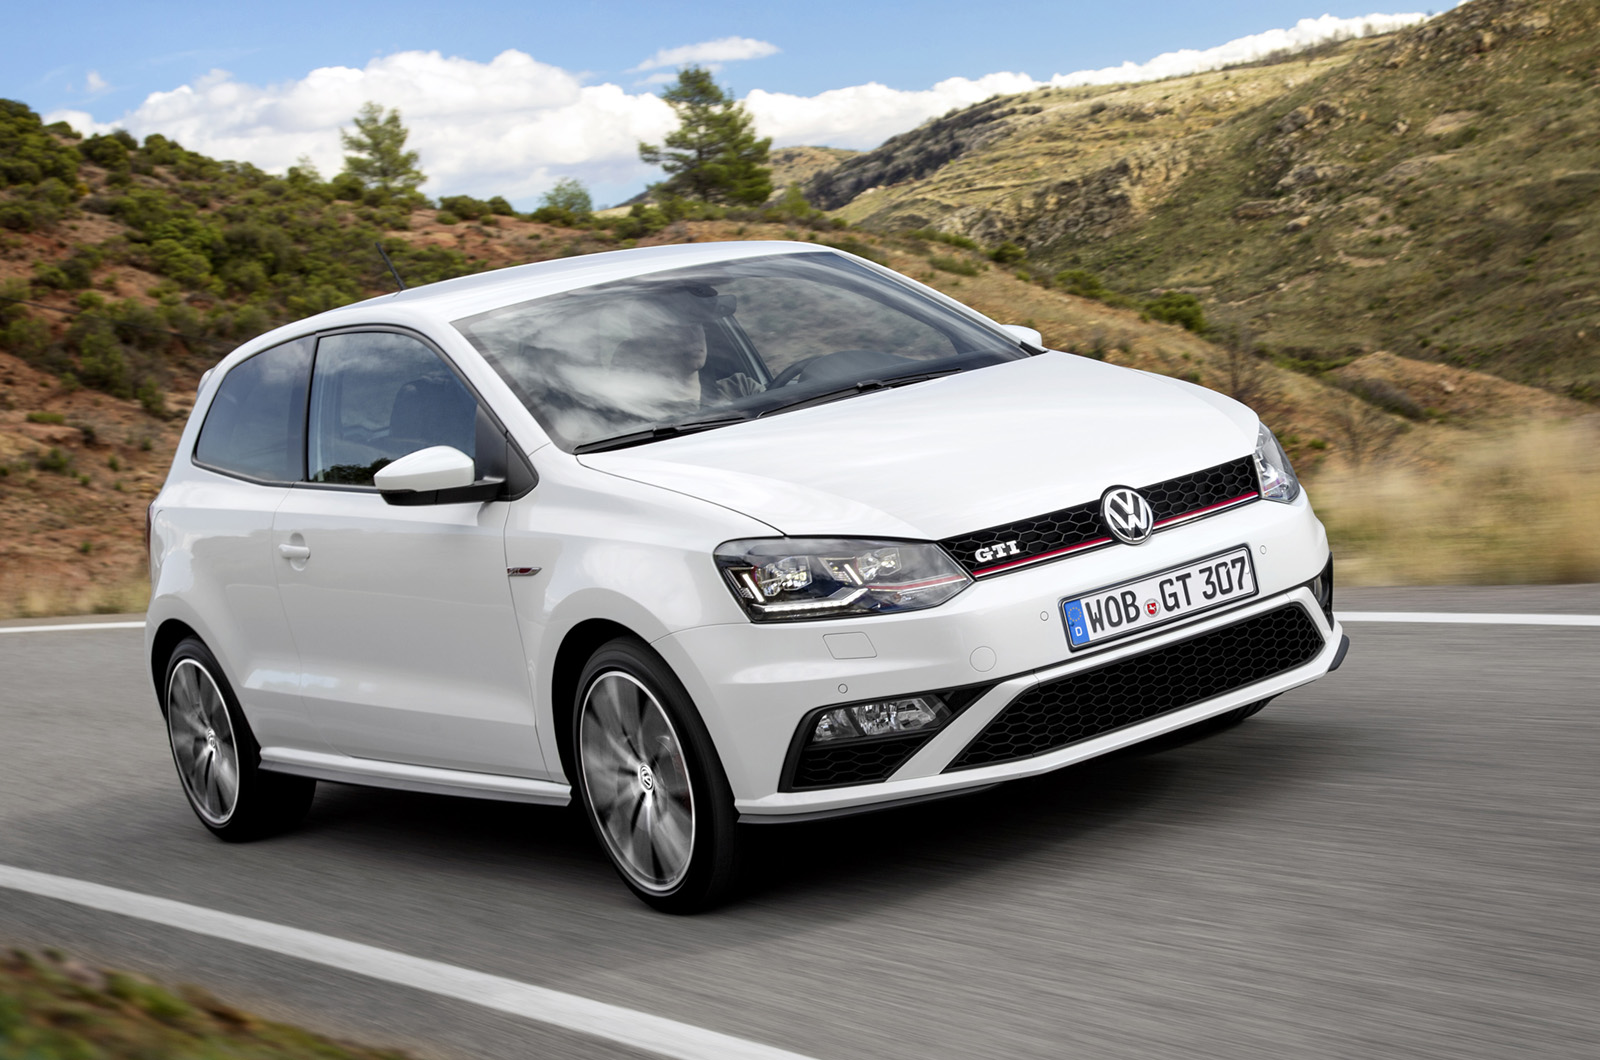 2014 Volkswagen Polo GTI 3dr manual review Autocar